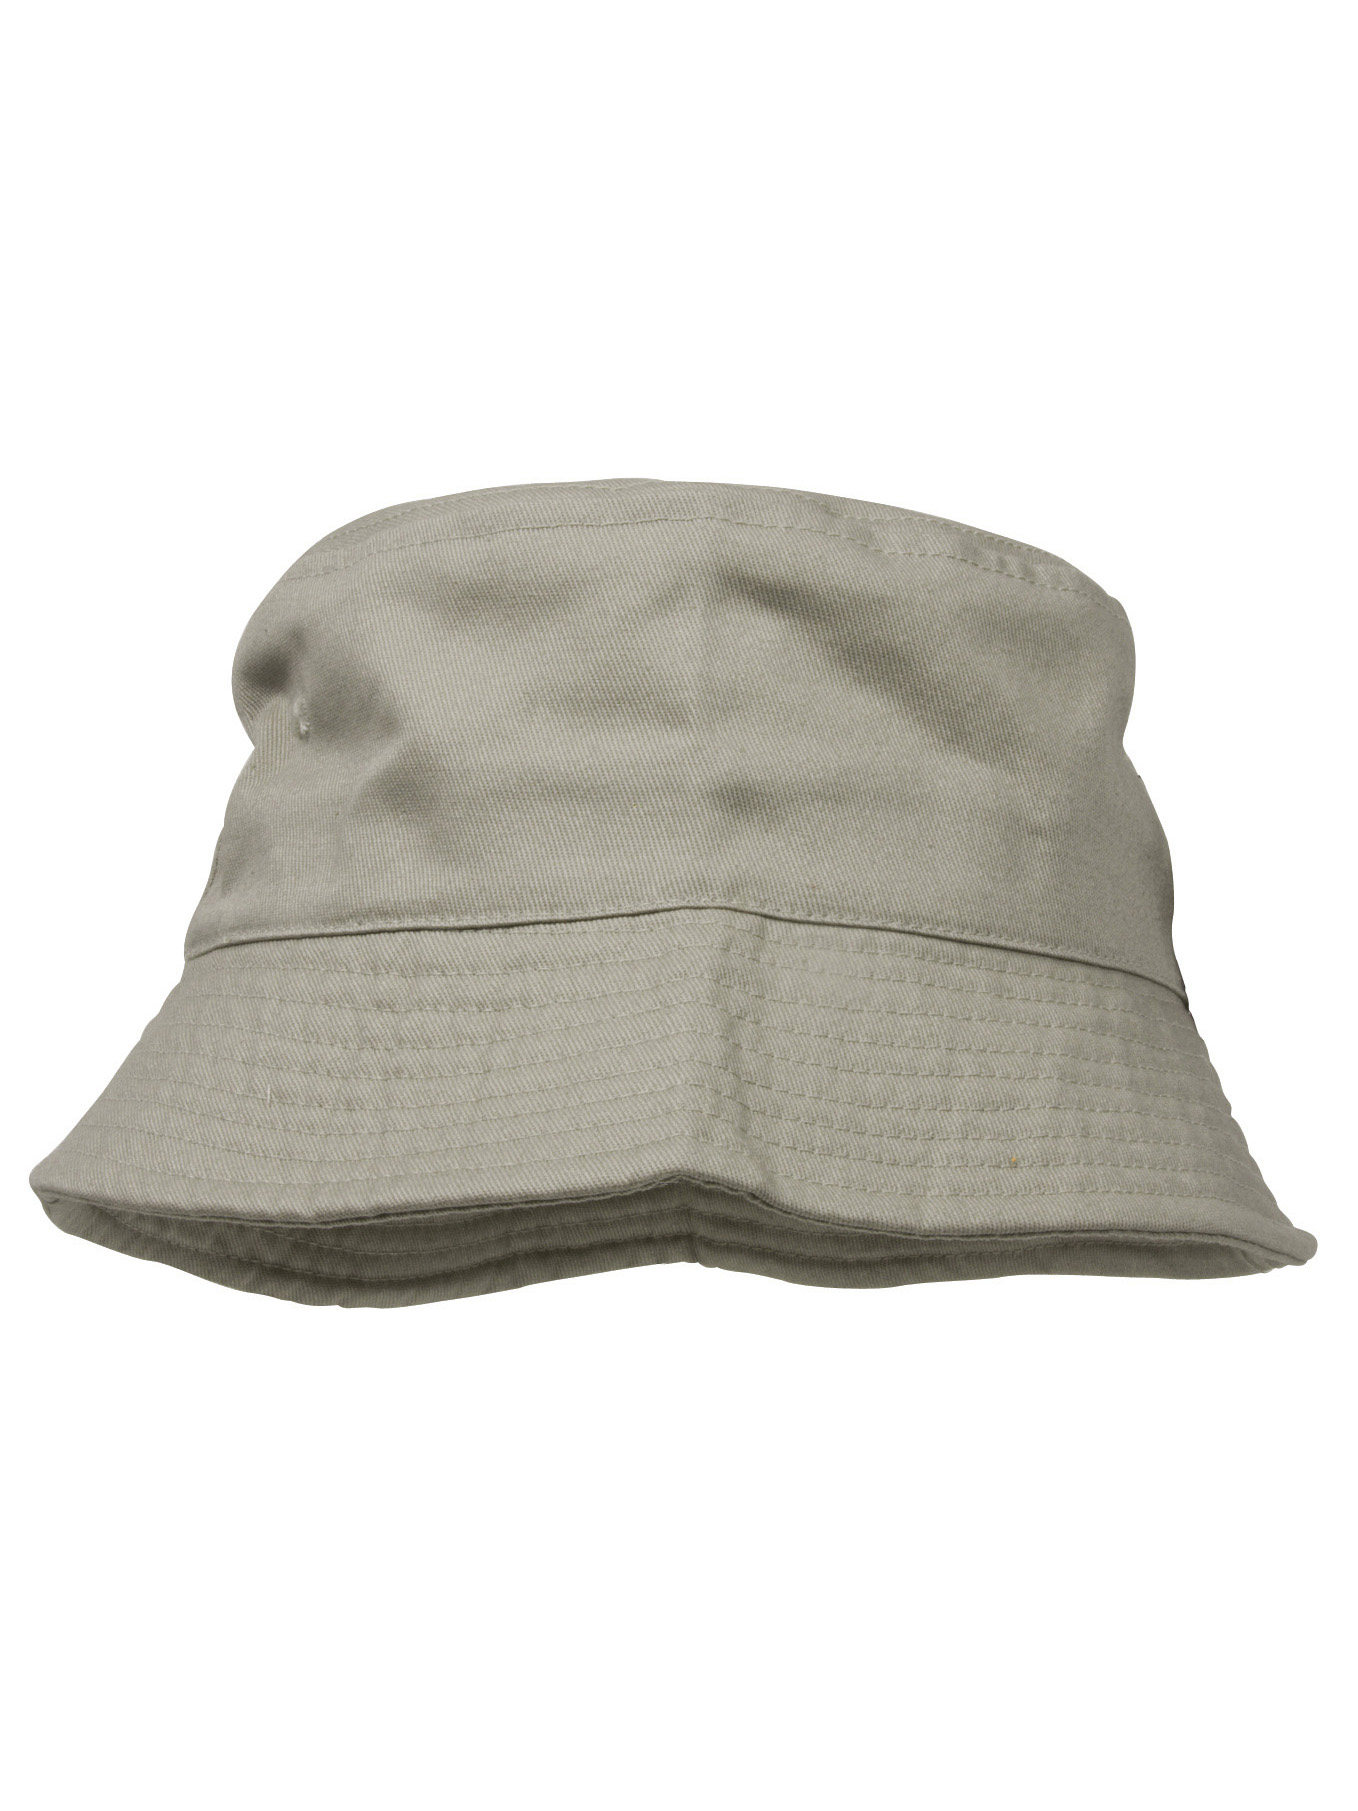 Youth Pigment Dyed Bucket Hat-Natural - image 2 of 3